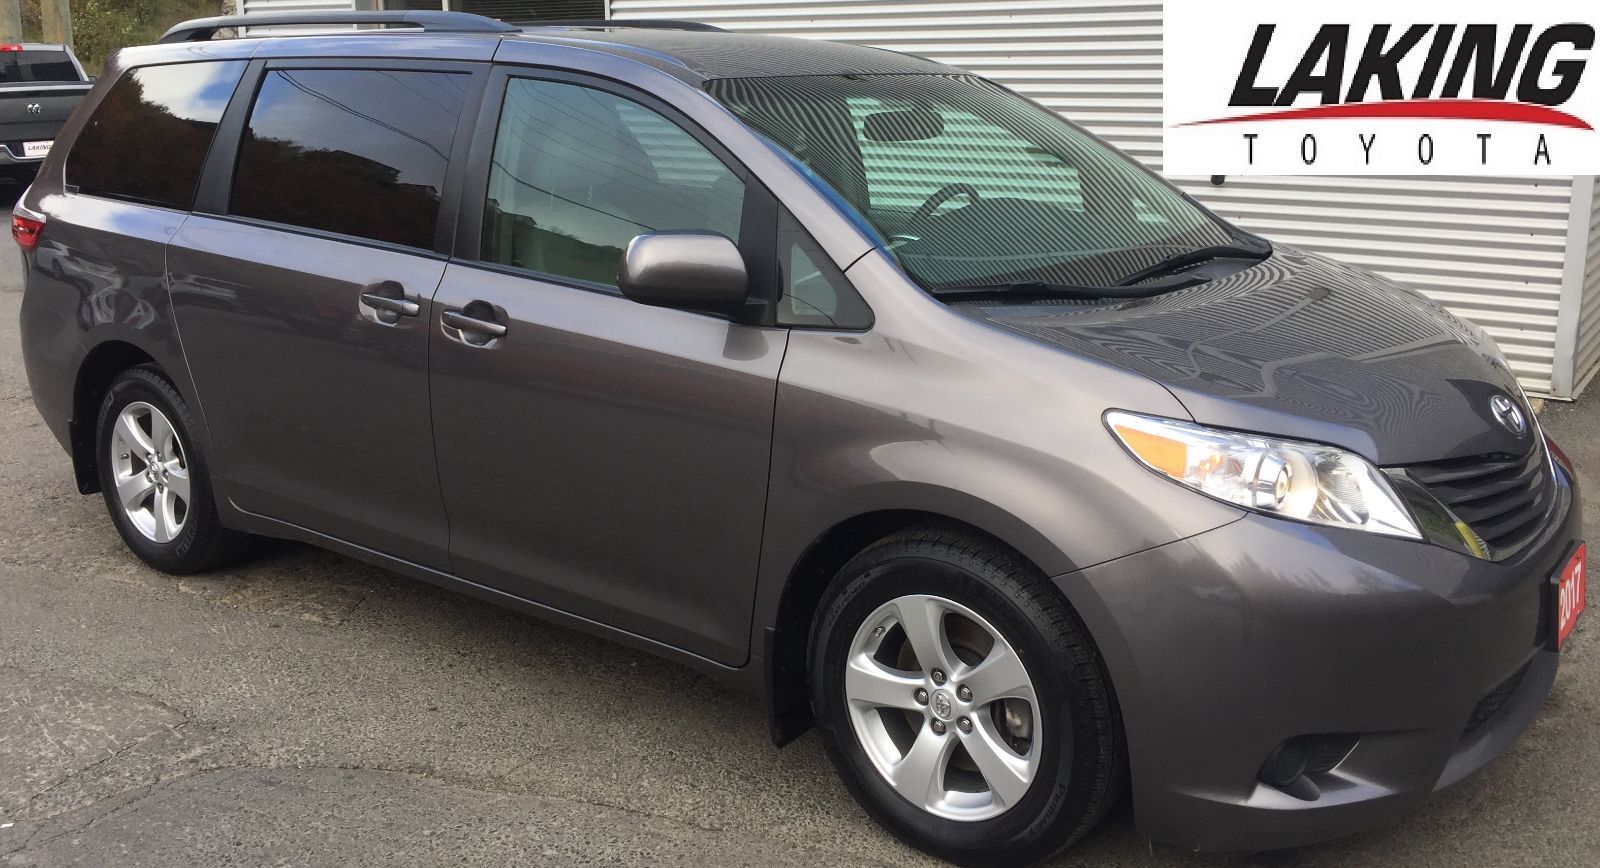 Used 2017 Toyota Sienna LE 8 PASSENGER "TOP CHOICE IN ITS CLASS" in